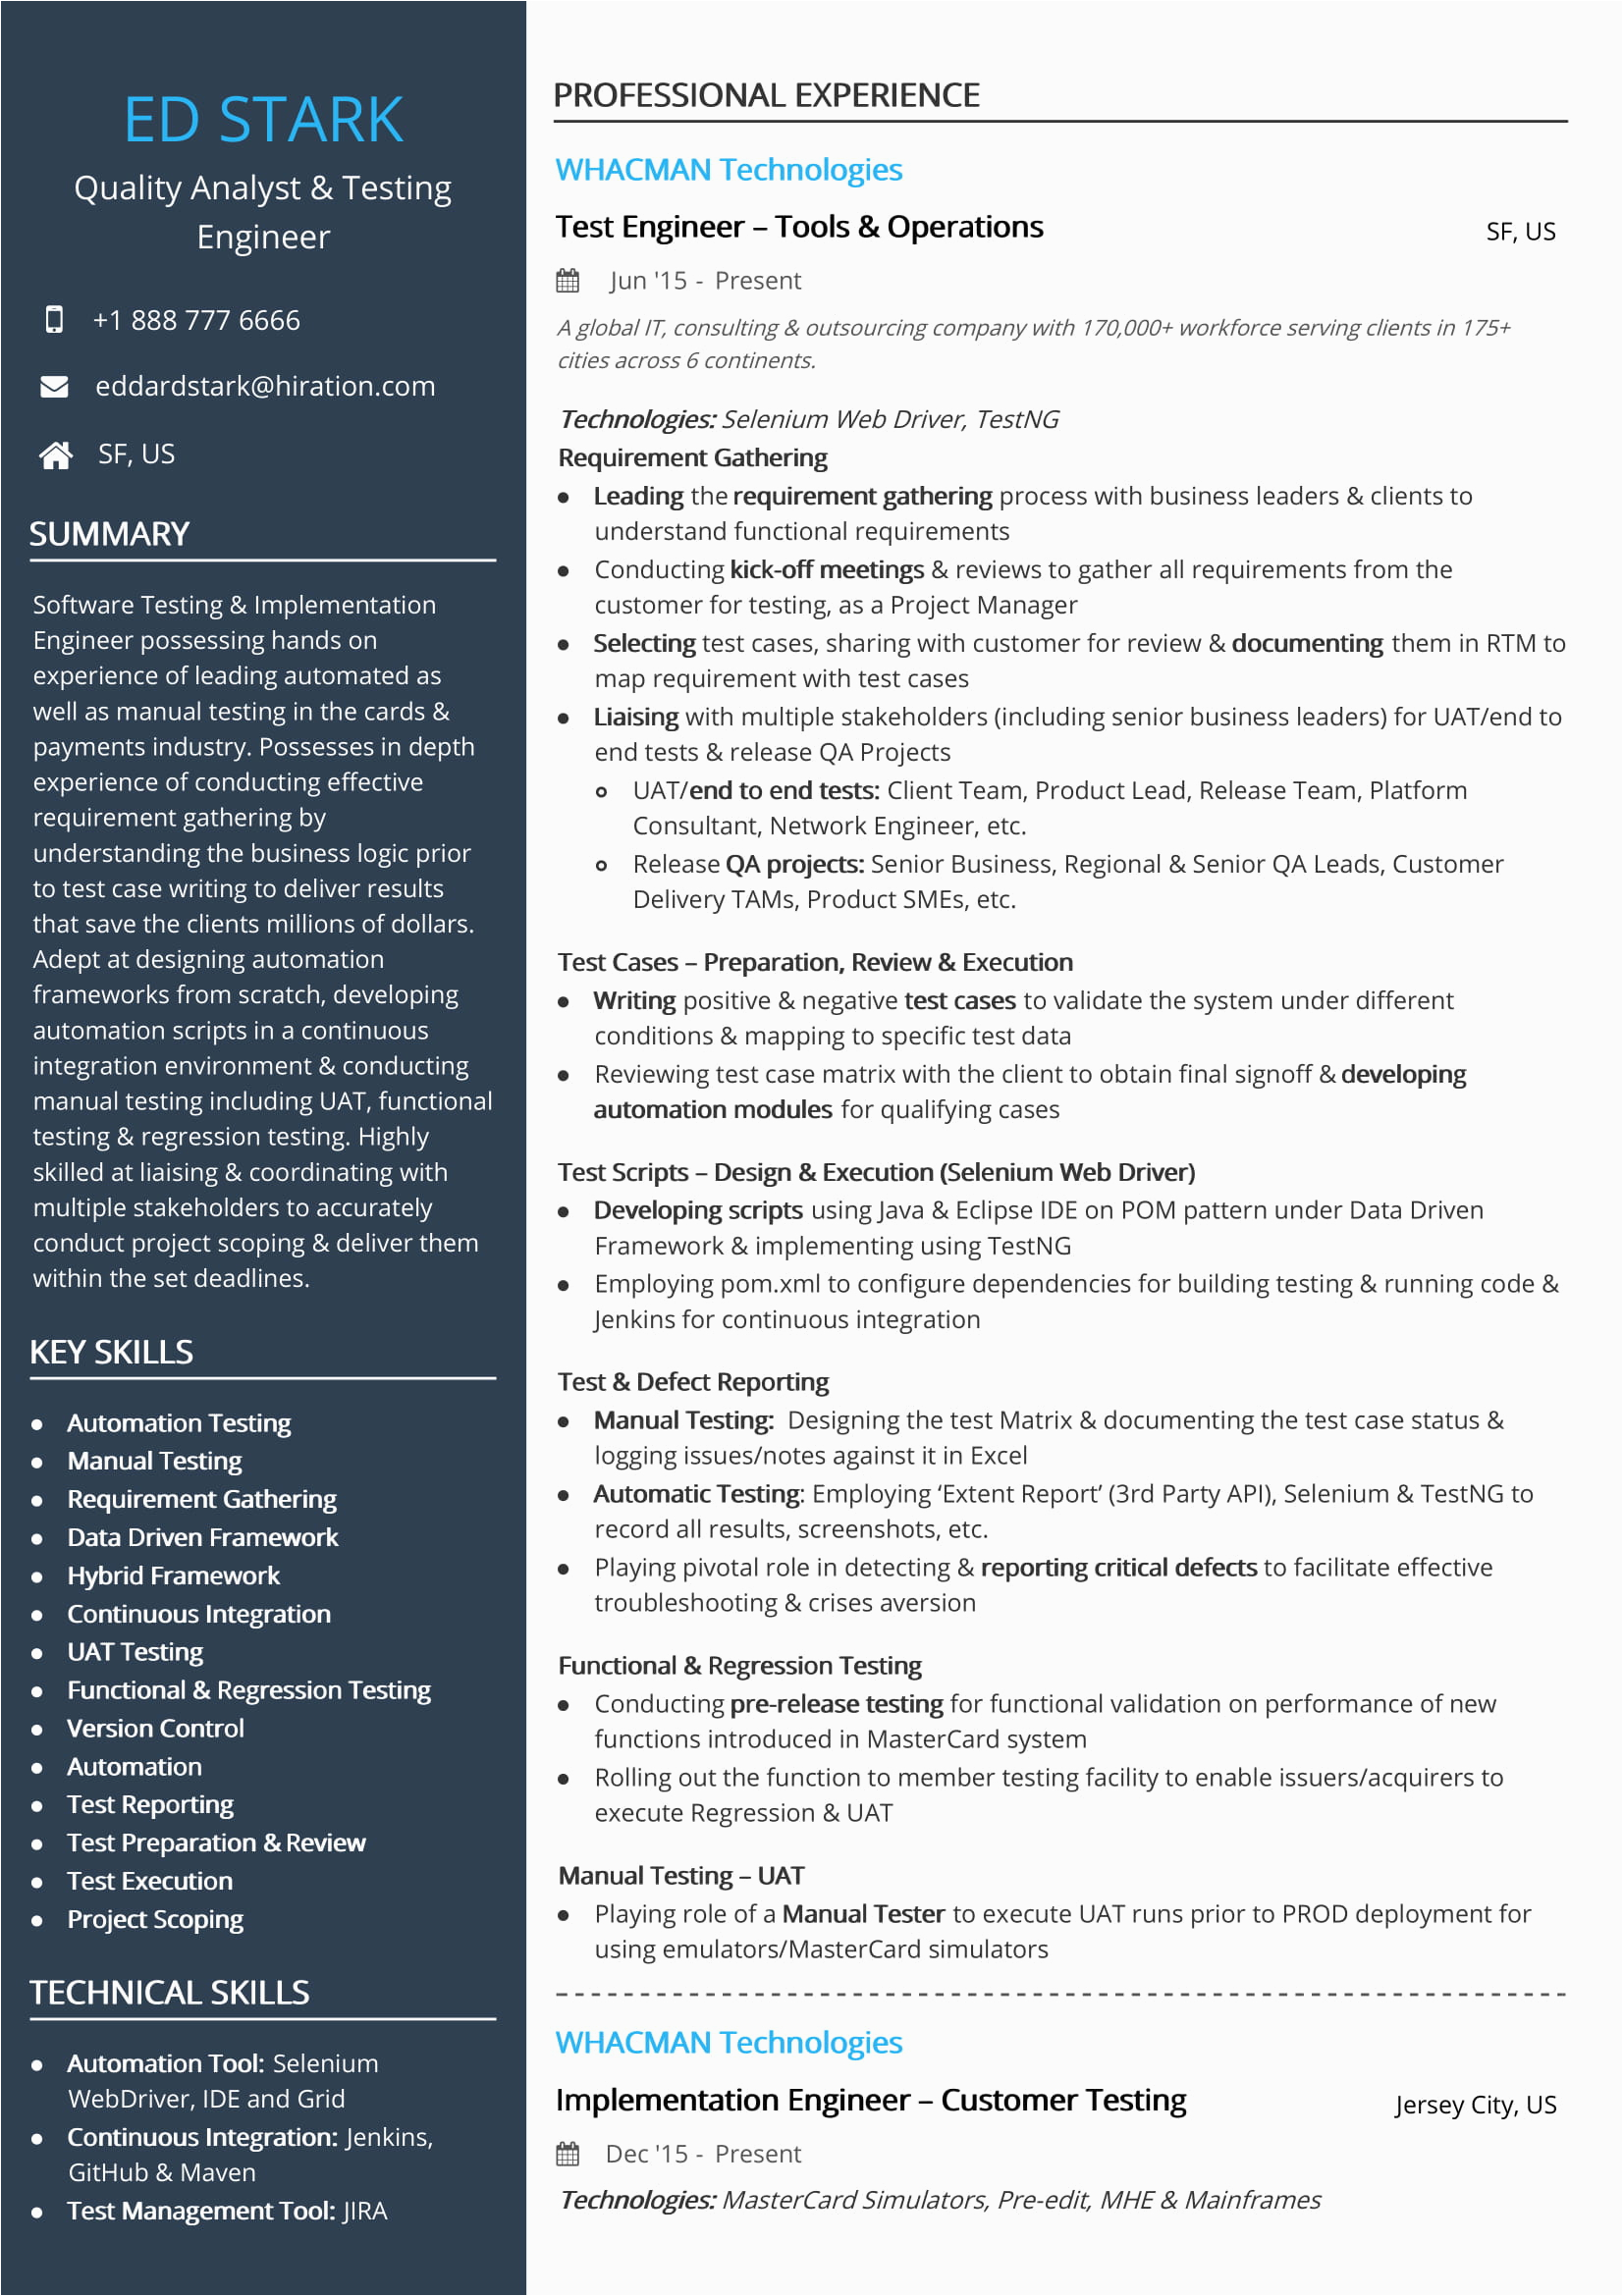 Sample Resume for Experienced Automation Test Engineer Technology Resume Examples & Resume Samples [2020]